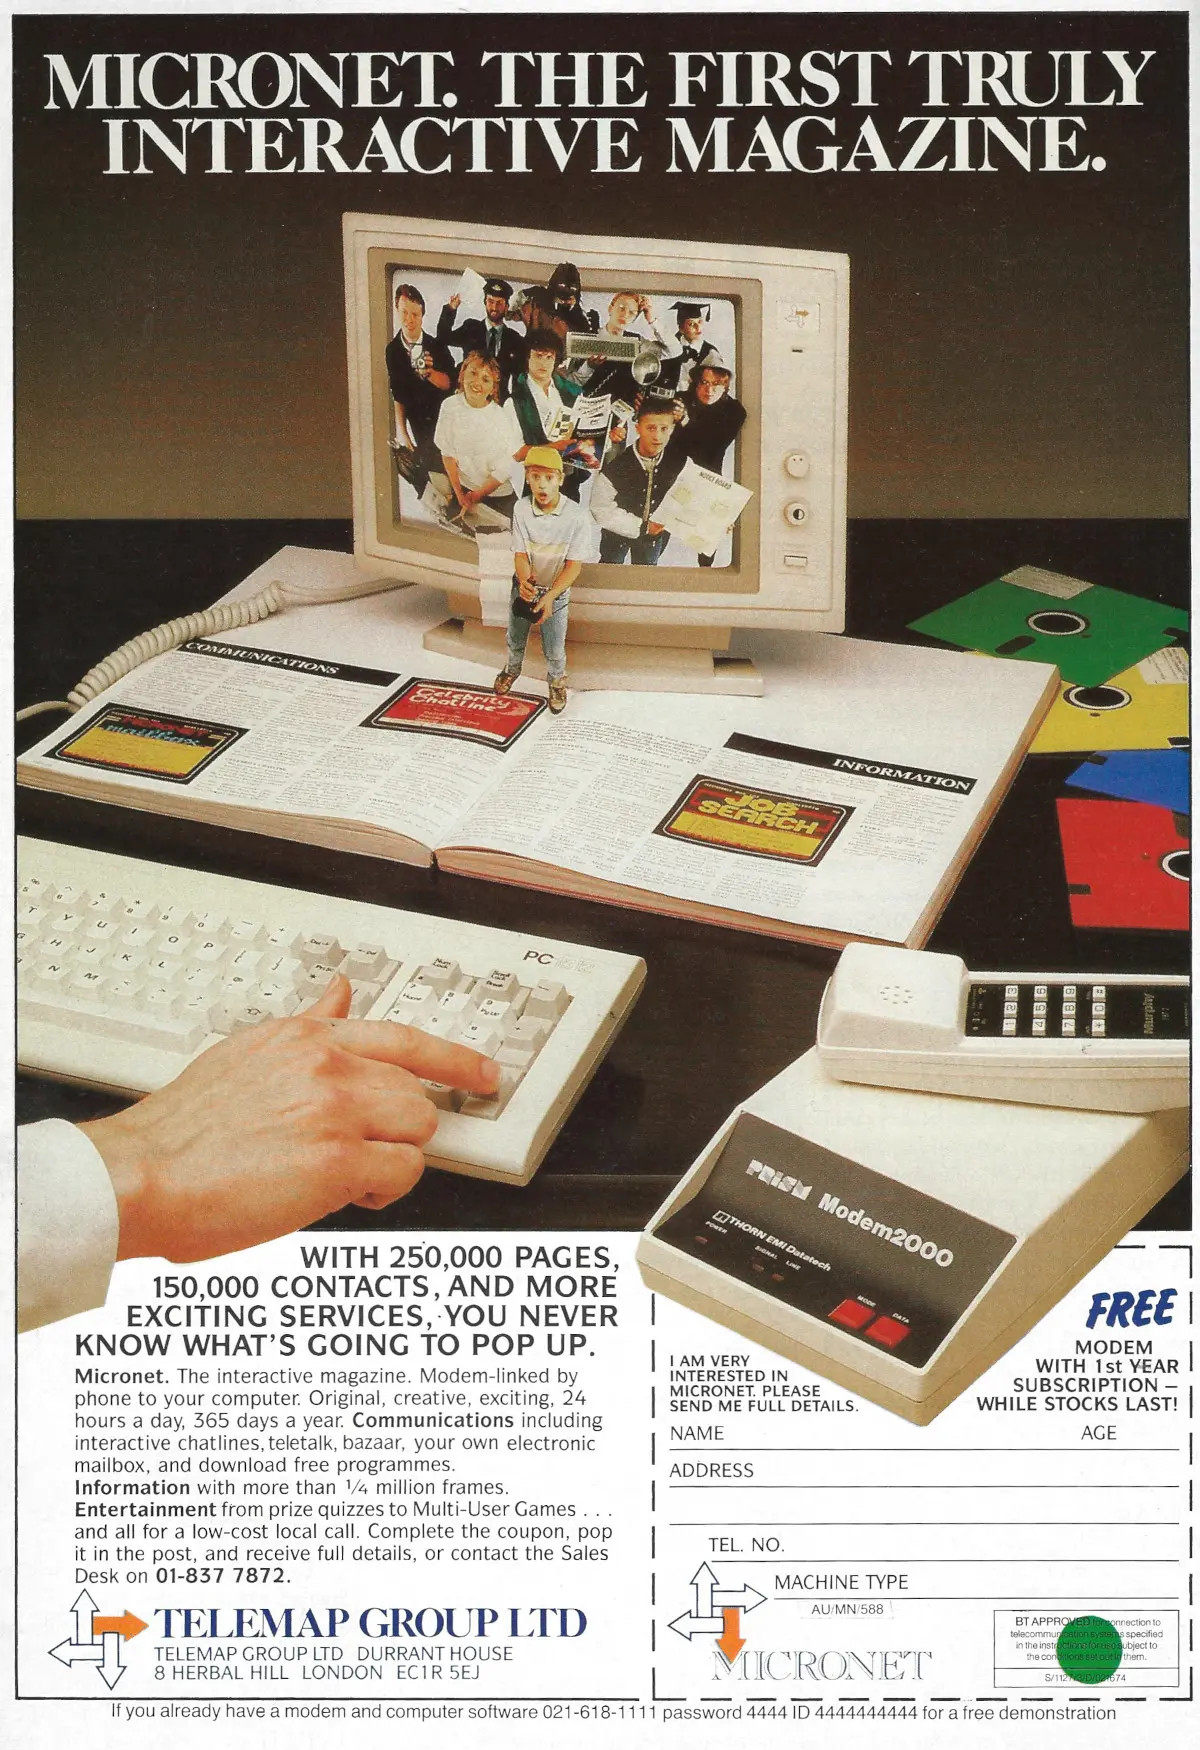 An advert for Telemap Micronet - the first truly interactive magazine - and featuring a Prism Modem2000, now built by Thorn EMI Datatech following the collapse of Prism itself. From Acorn User, May 1988